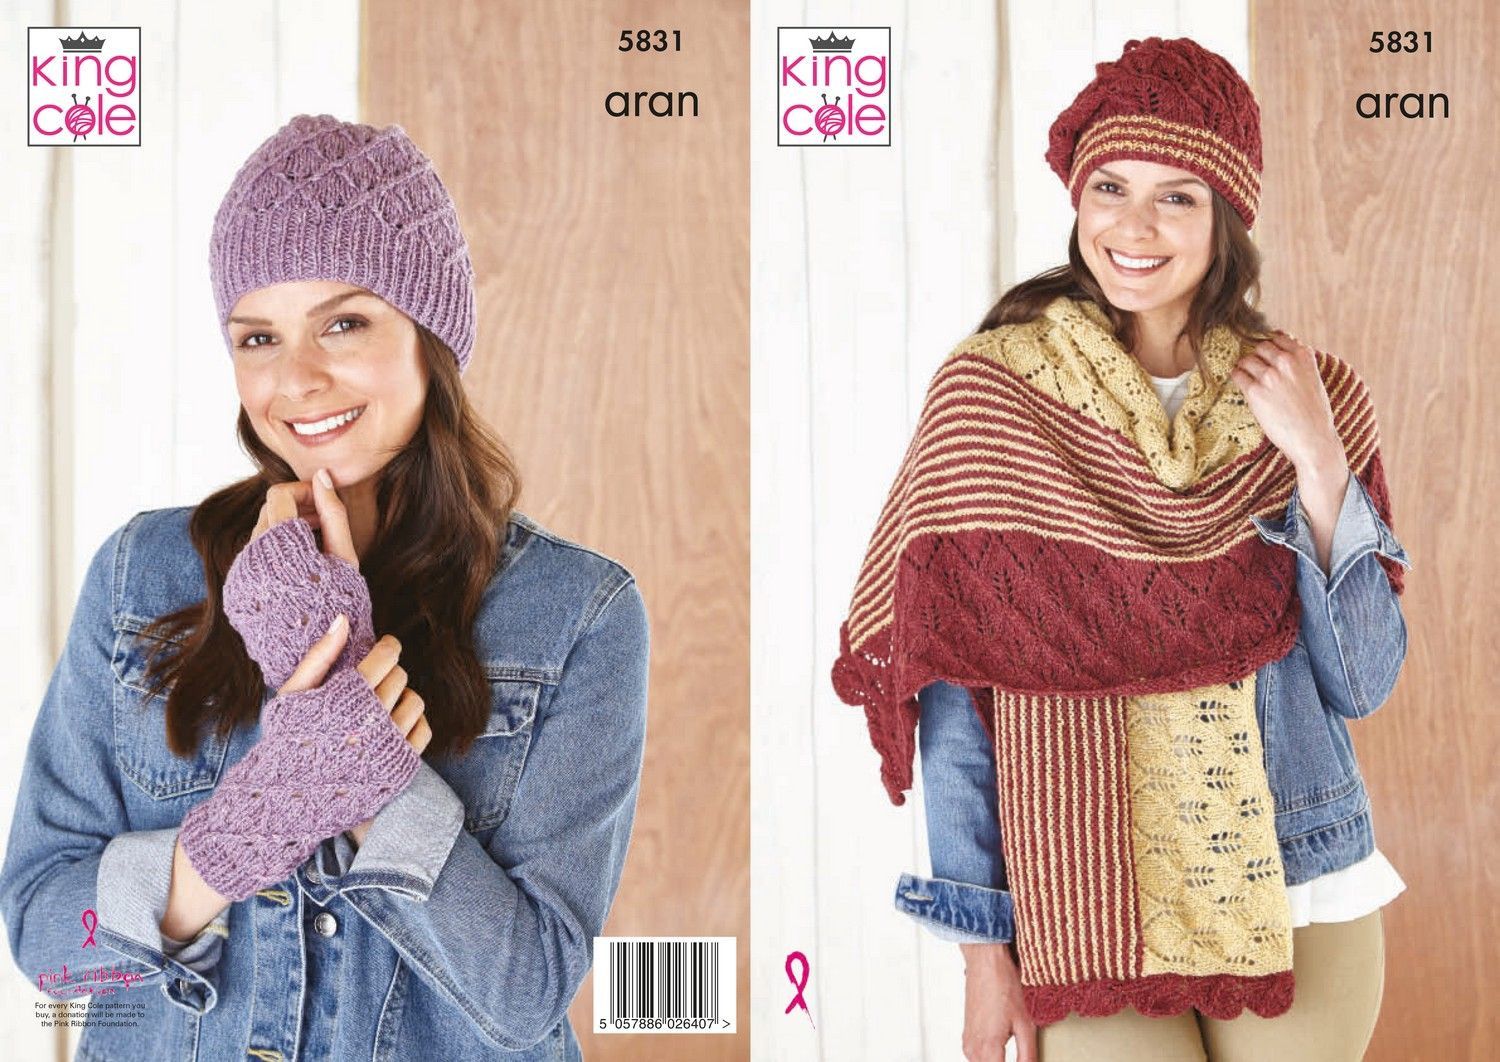 King Cole Pattern 5831 Accessories in Forest Aran